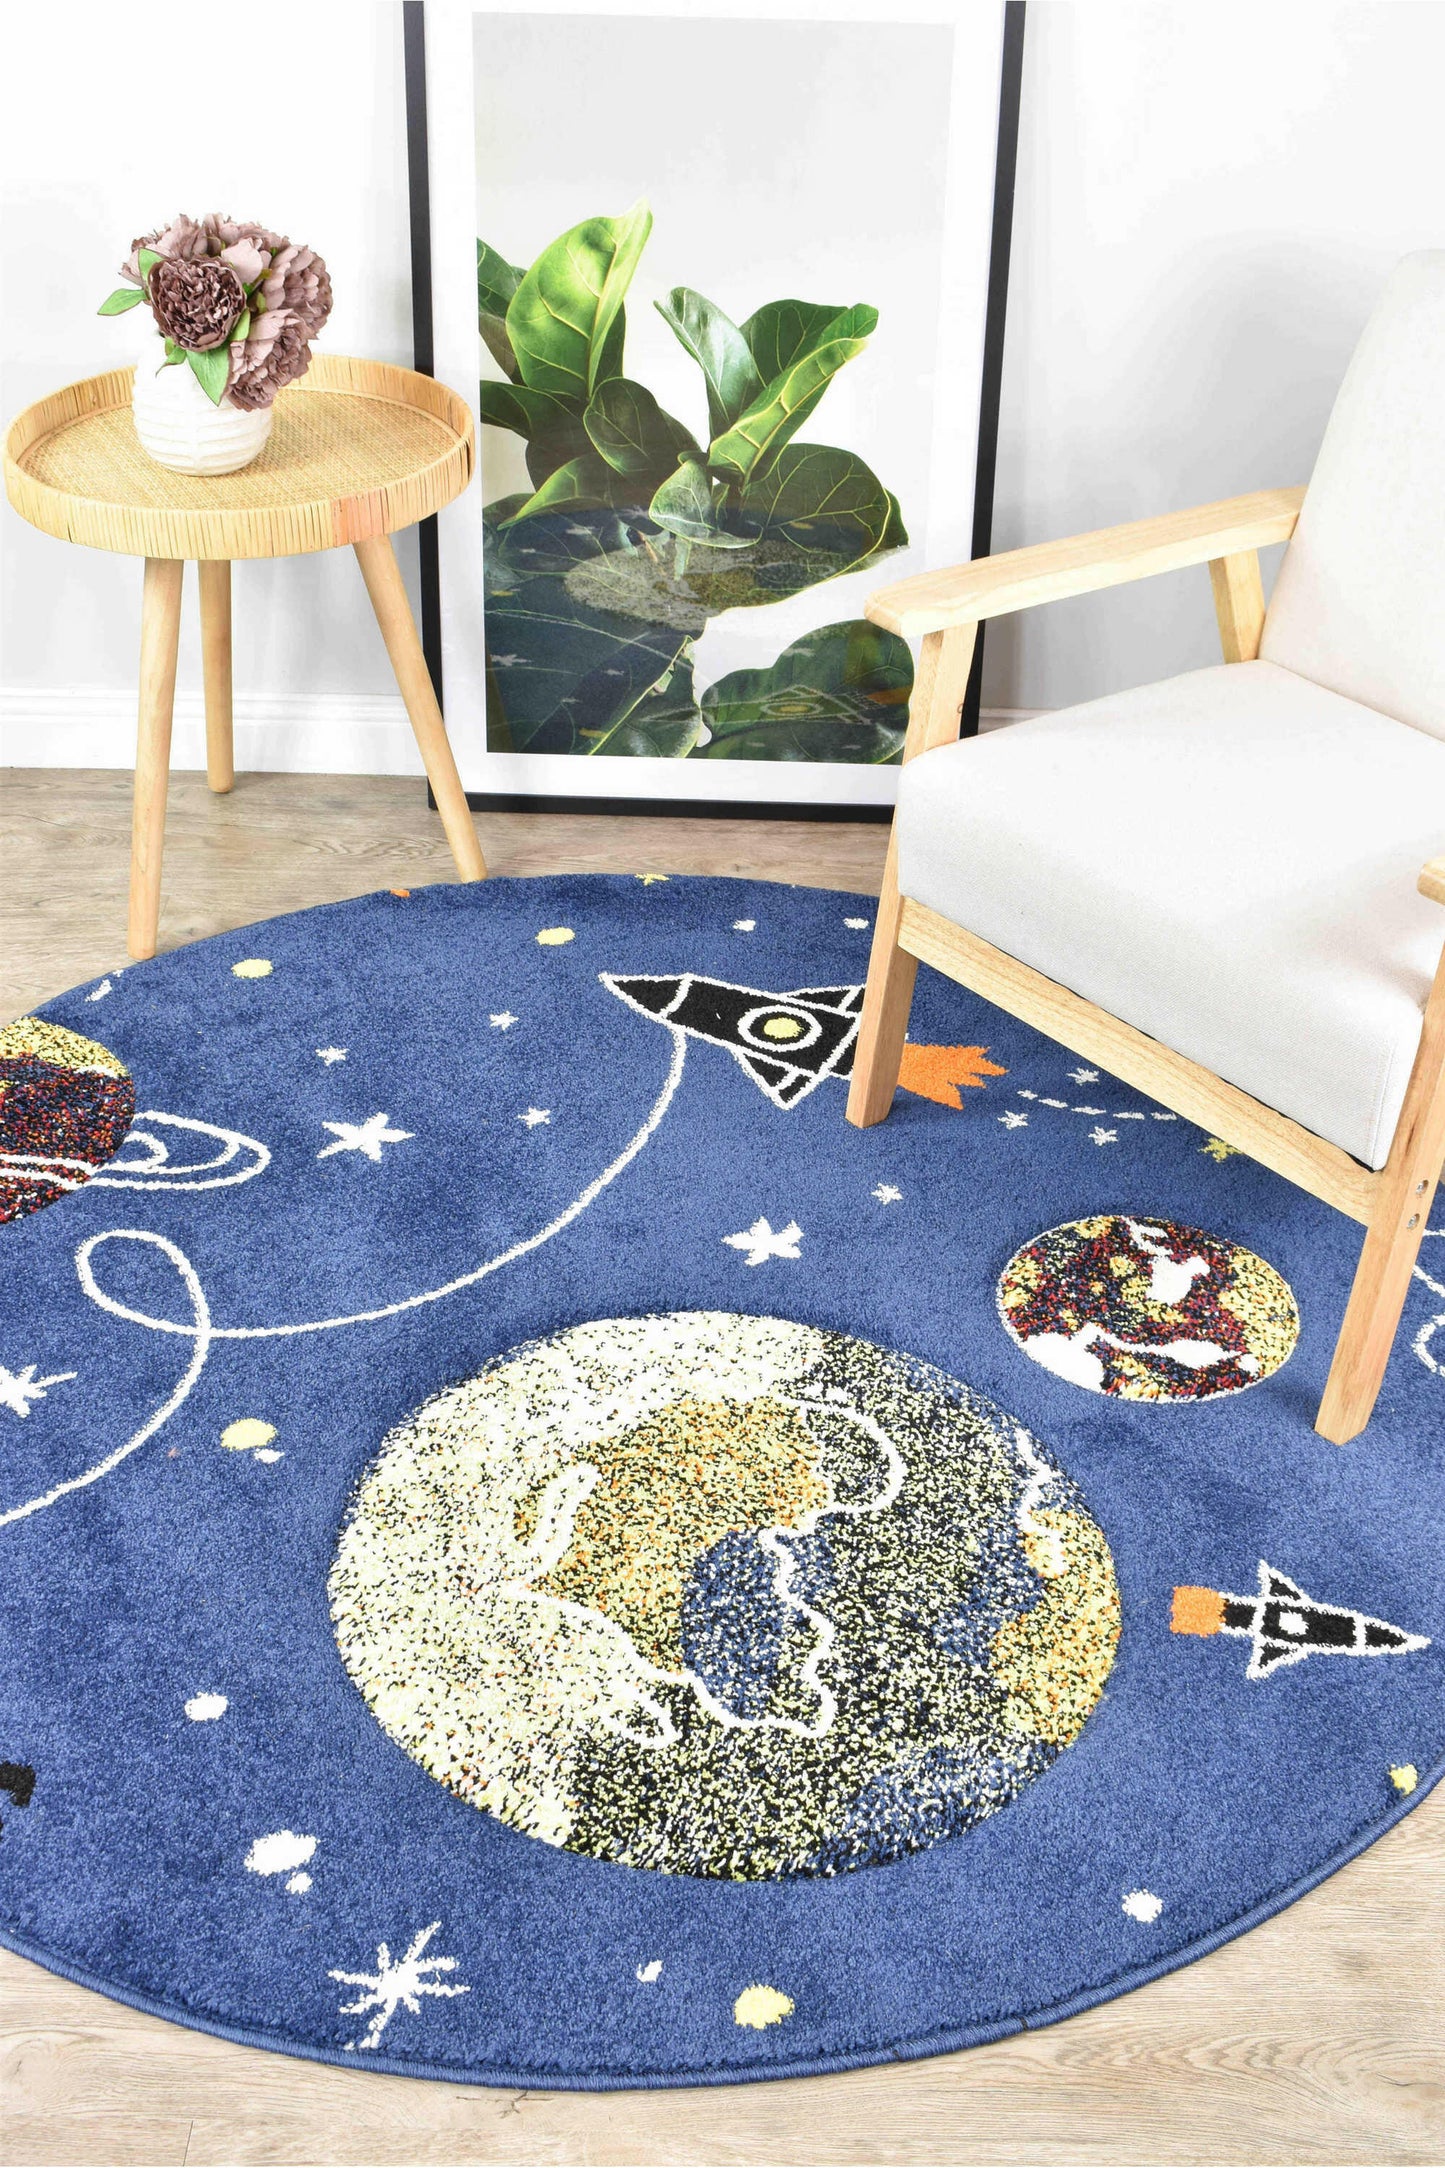 Whimsy Kids D359A Space ROUND